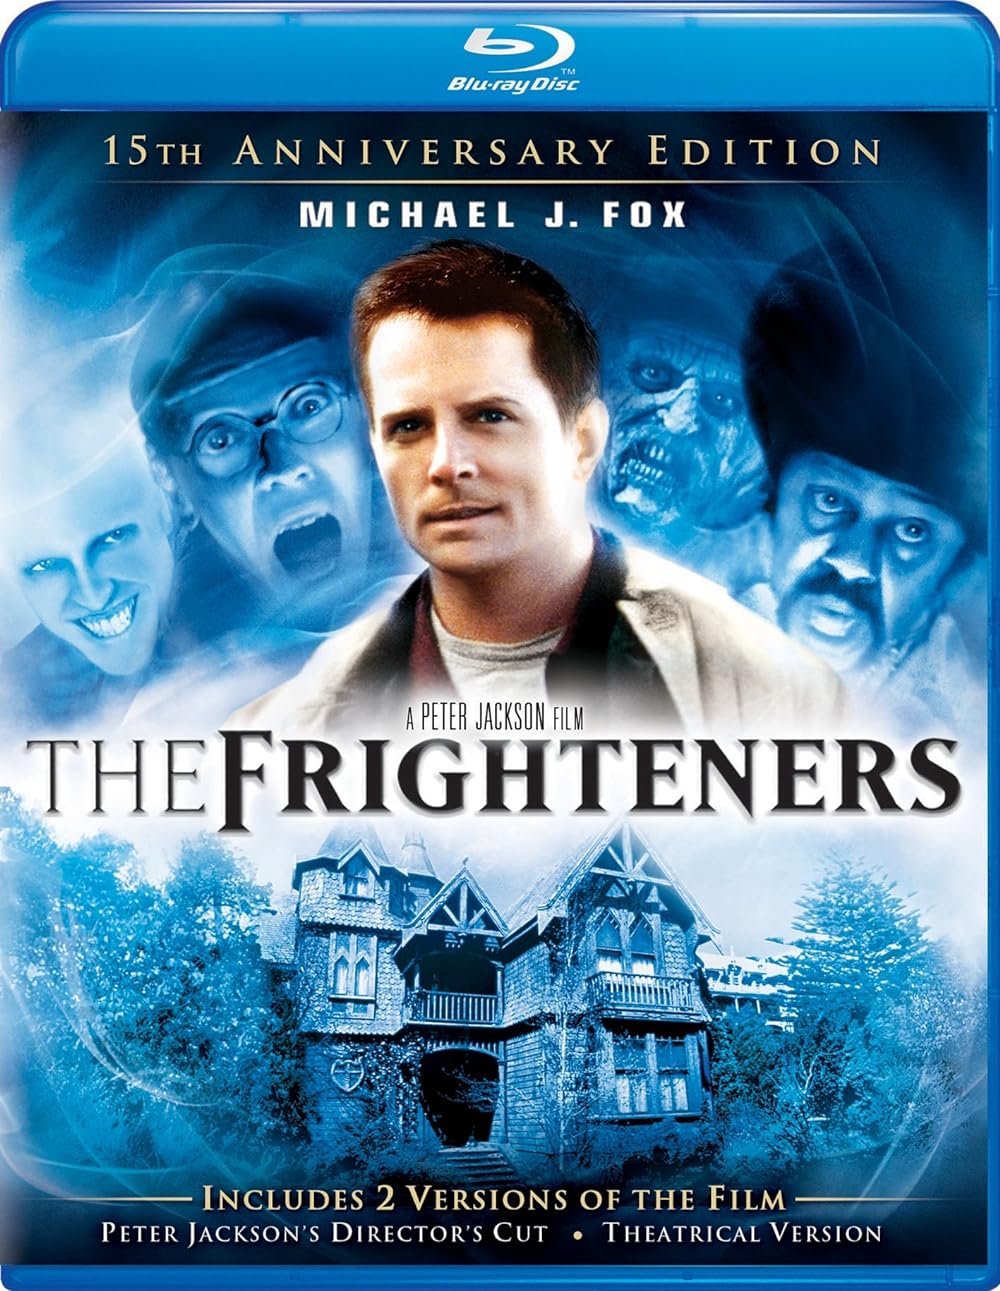 The Frighteners (1996) Theatrical Cut 768Kbps 23.976Fps 48Khz 5.1Ch BluRay Turkish Audio TAC